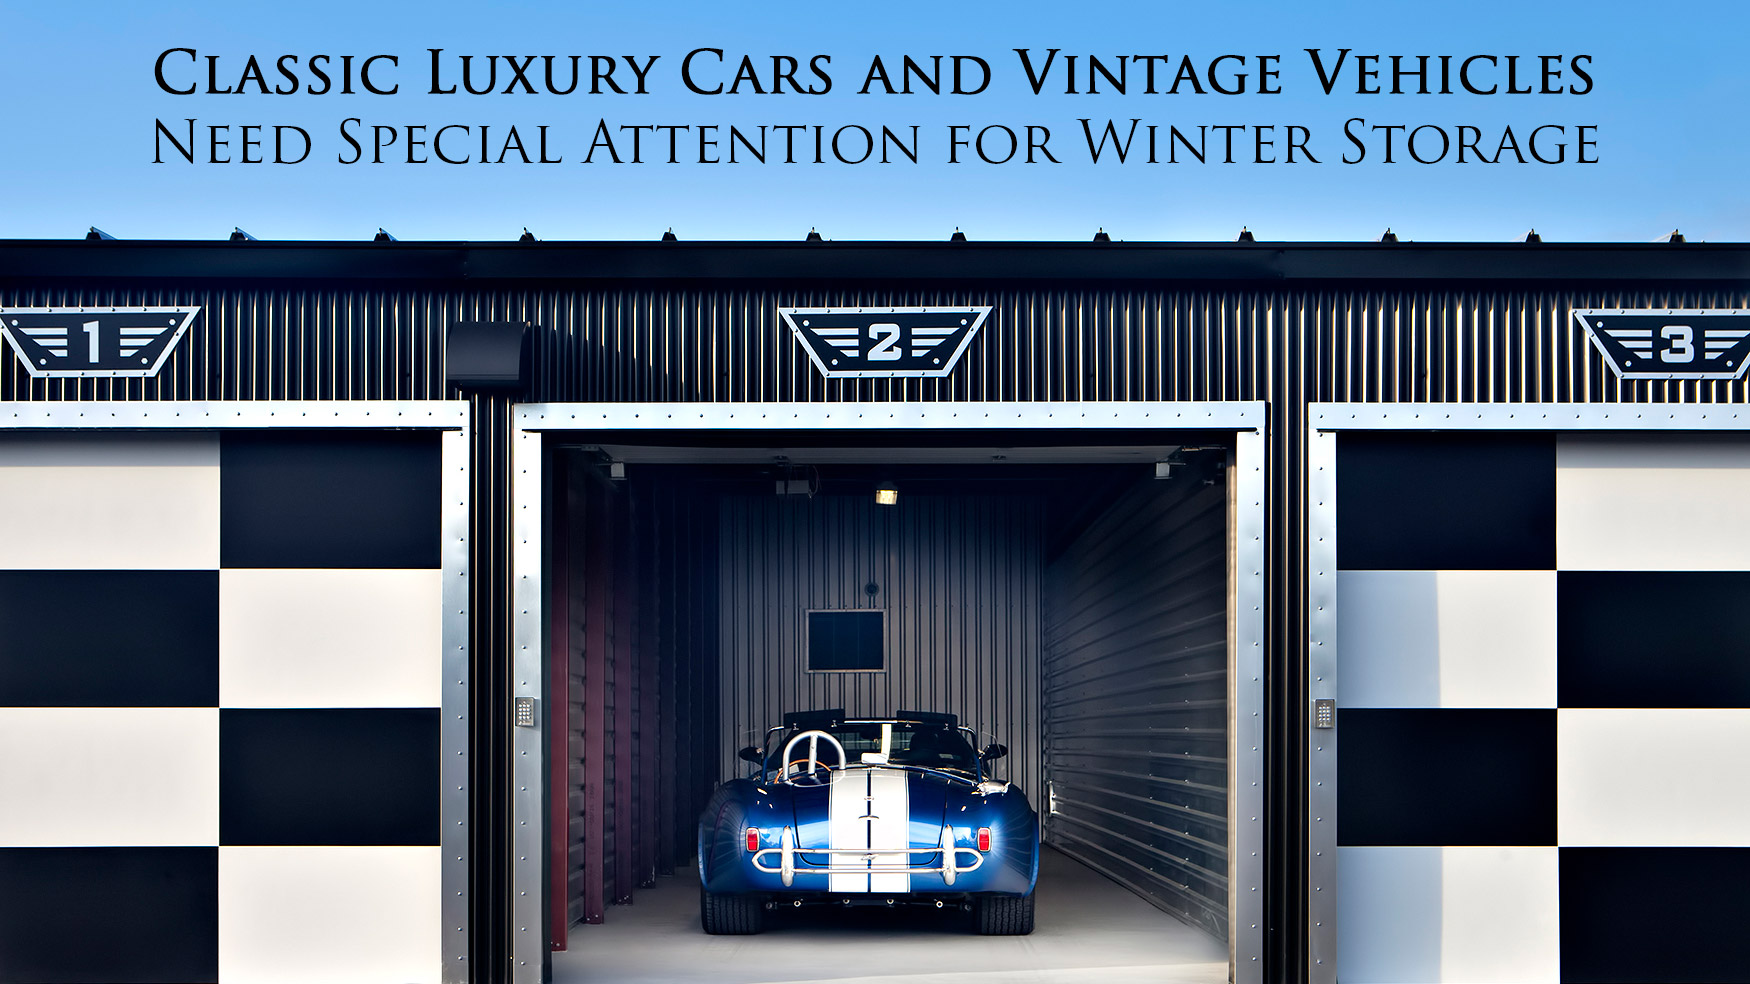 Classic Luxury Cars and Vintage Vehicles Need Special Attention for Winter Storage